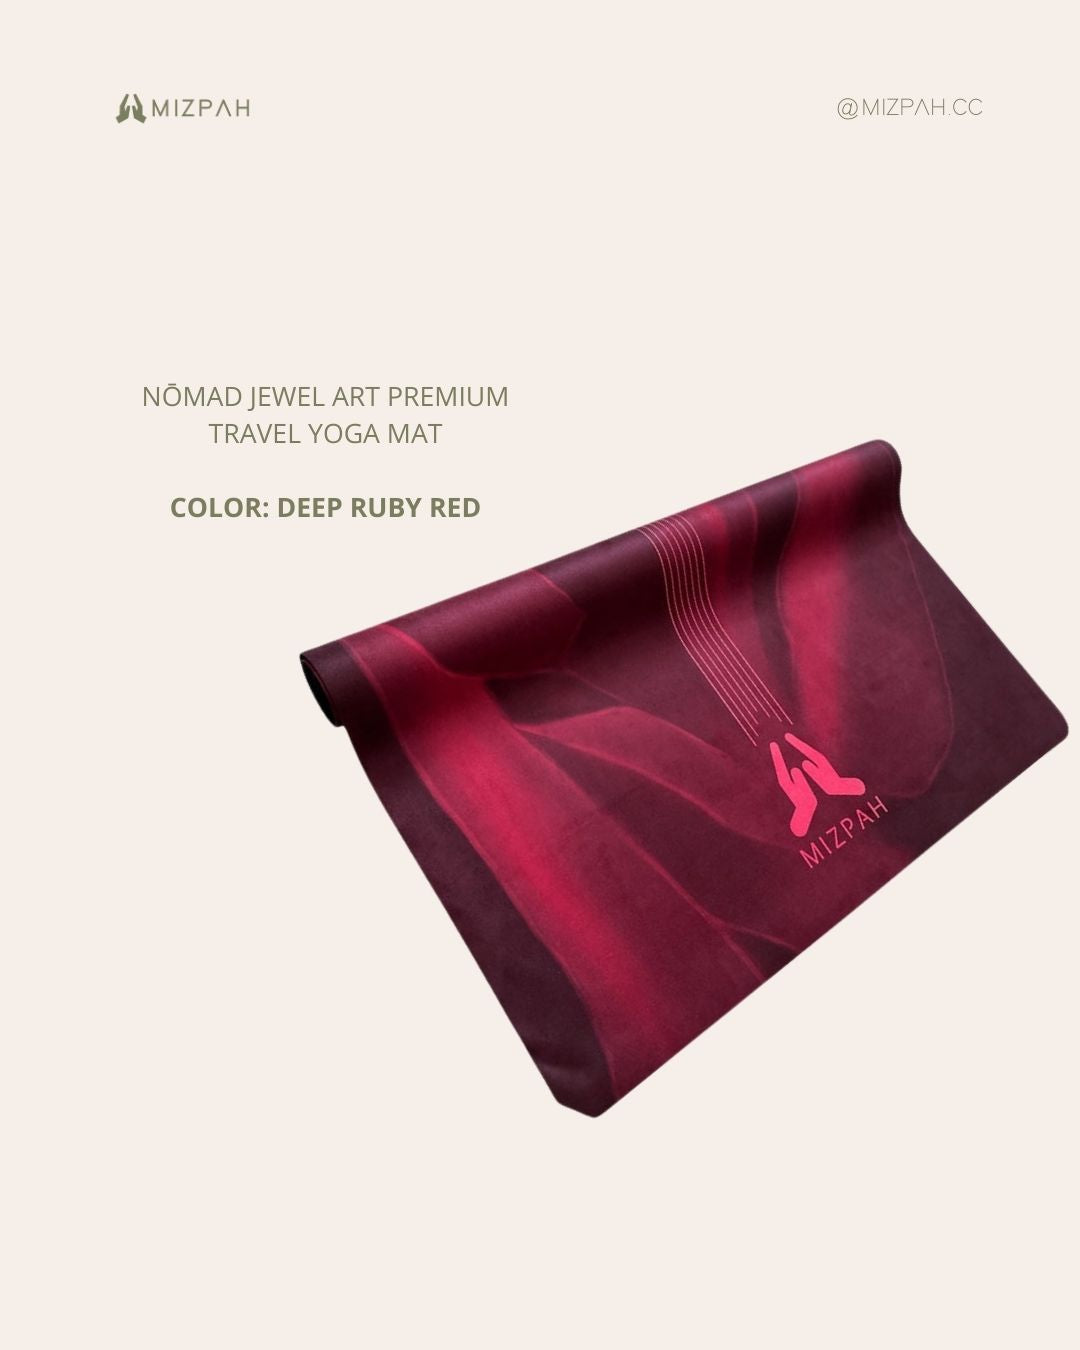 The Nomad Jewel Art Yoga Mat is  it's the lightest mat at a little over a kilo thus very convenient. This mat is foldable and can easily fit inside any suitcase